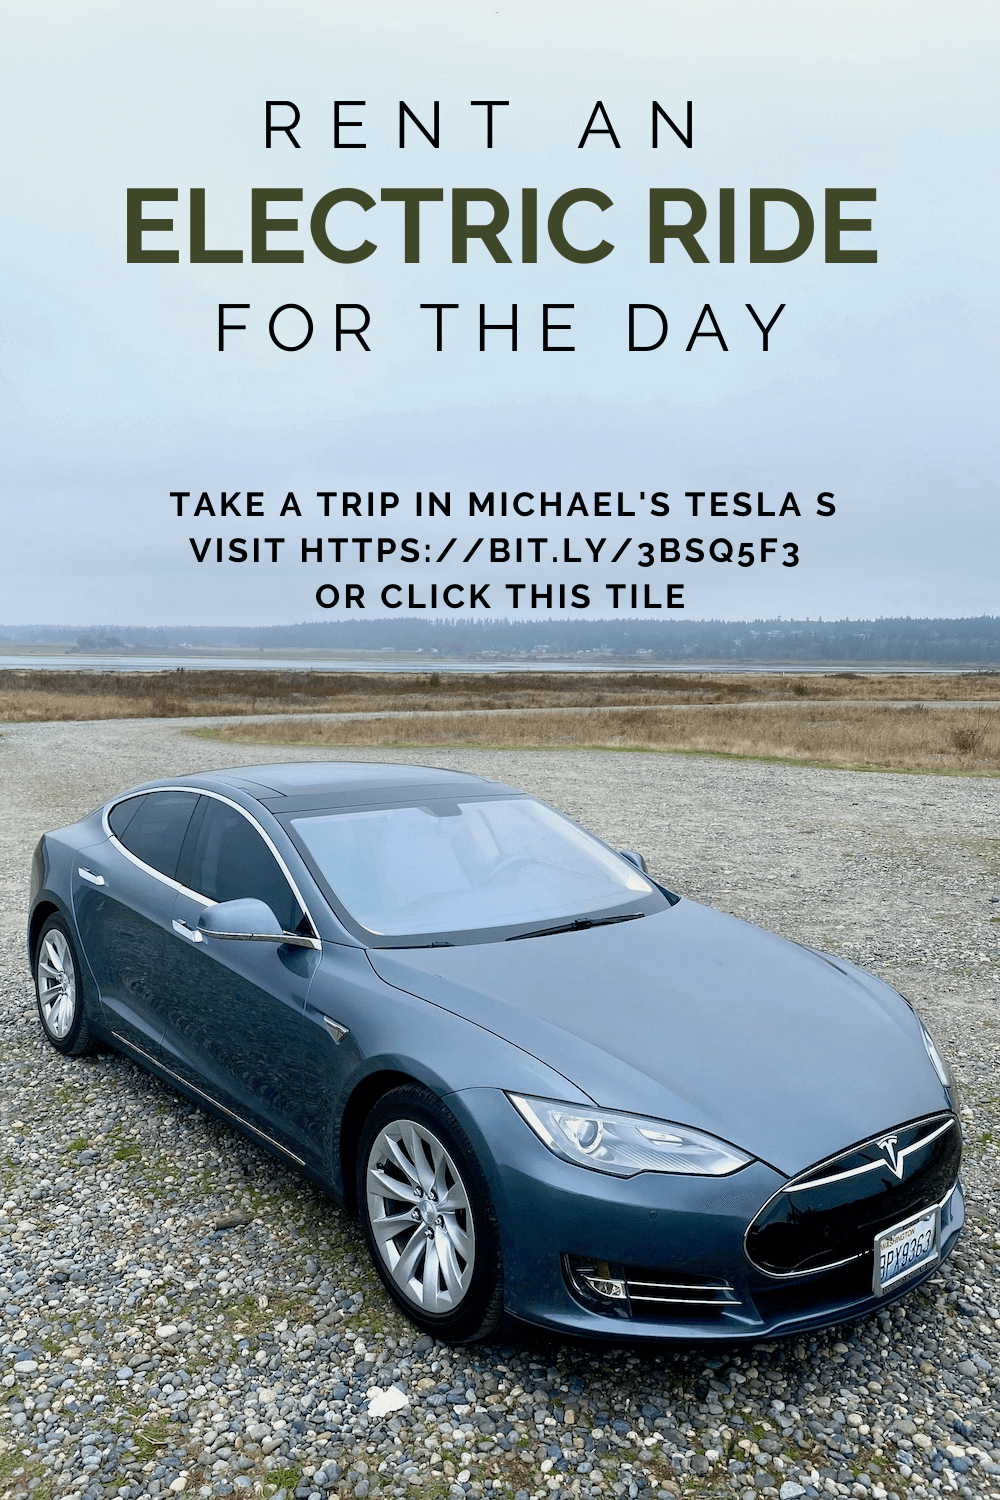 This Pinterest pin shows a Tesla S series parked at the beach on a bed of pebbly shore rocks with flat coastal lands in the background under a gray sky.